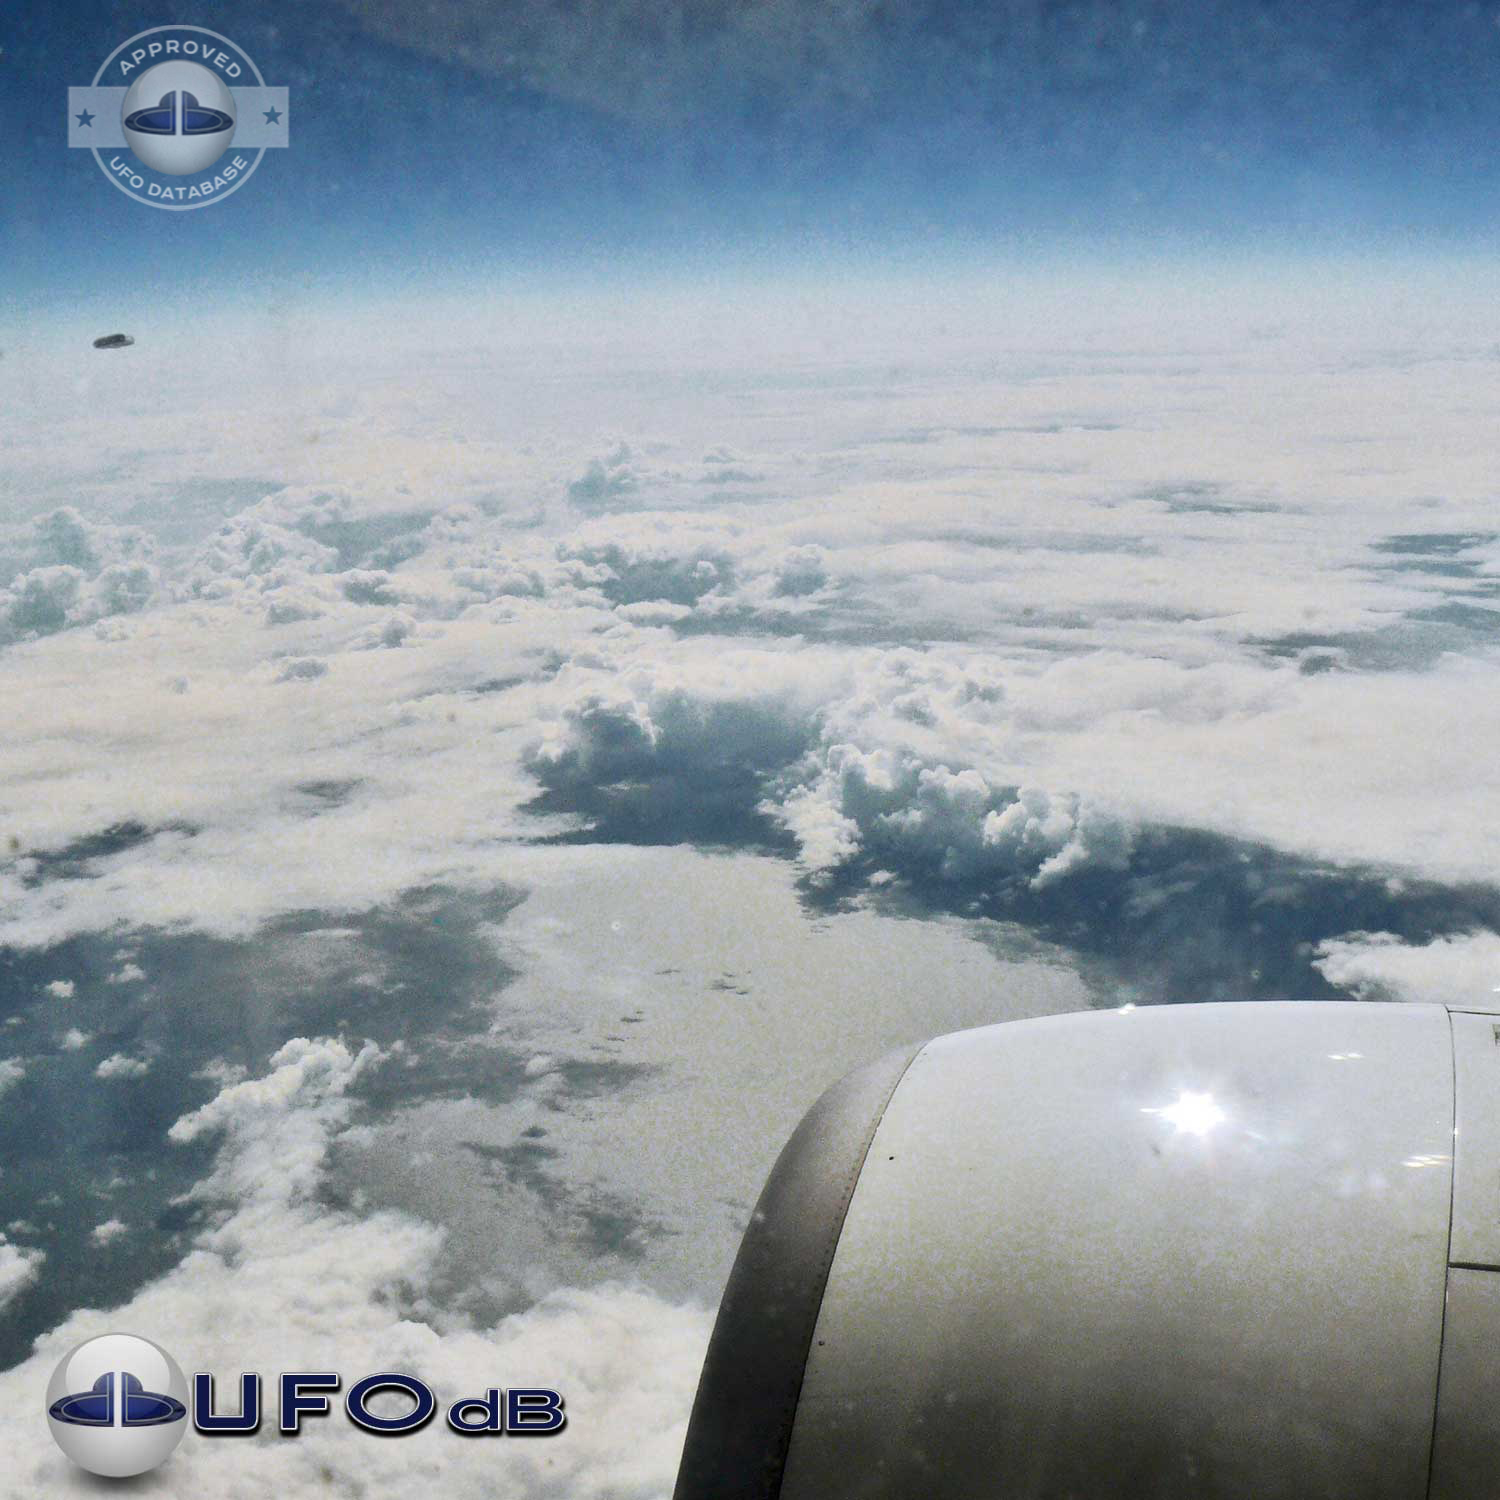 UFO picture Sighting from RyanAir airplane - Portugal UK - May 2010 UFO Picture #93-1